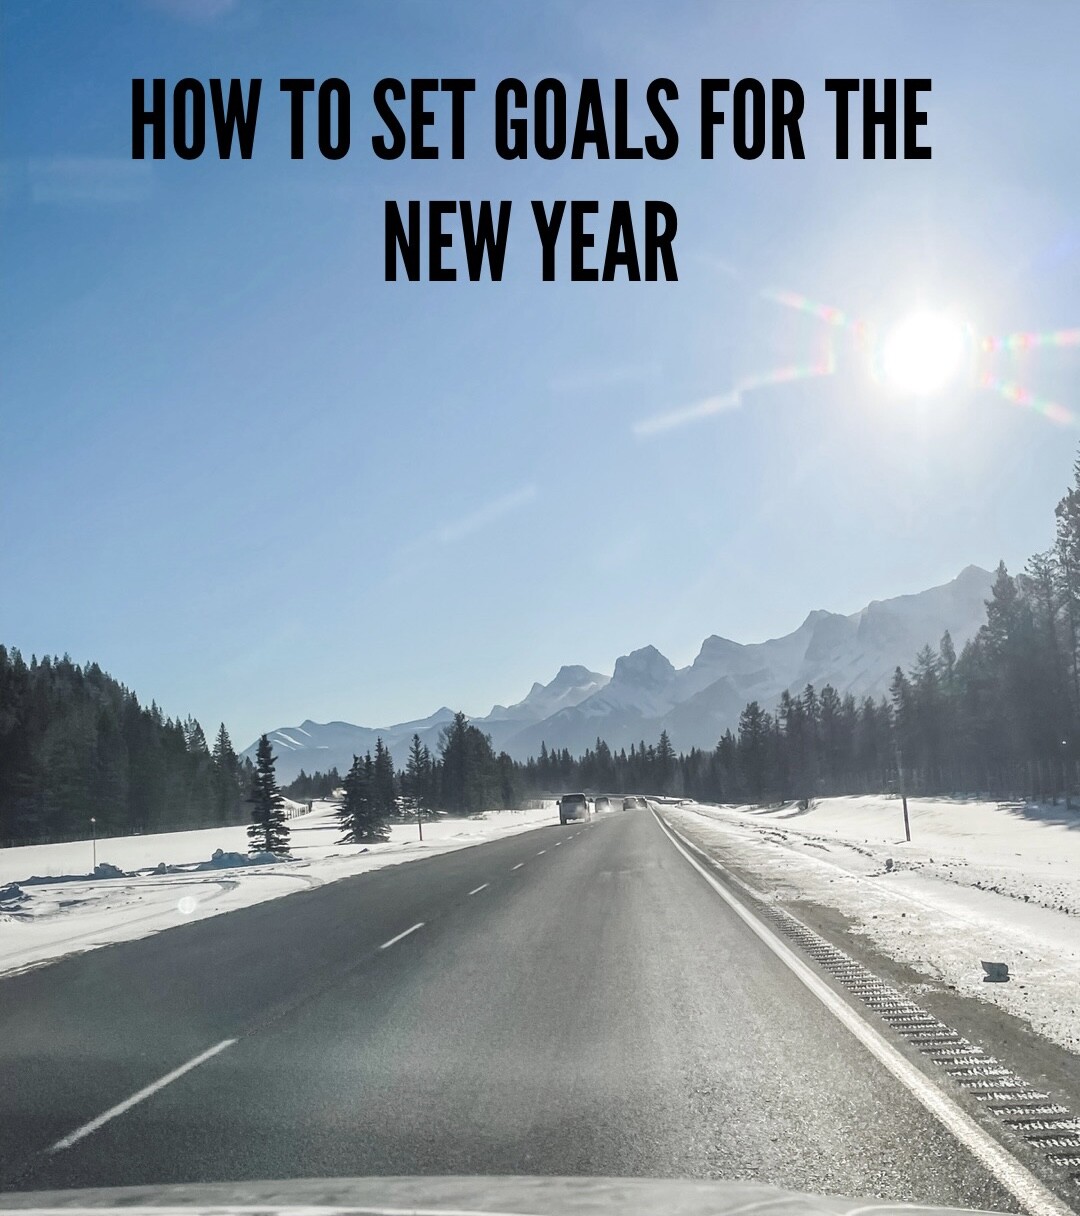 Goal Setting Tips That Actually Work